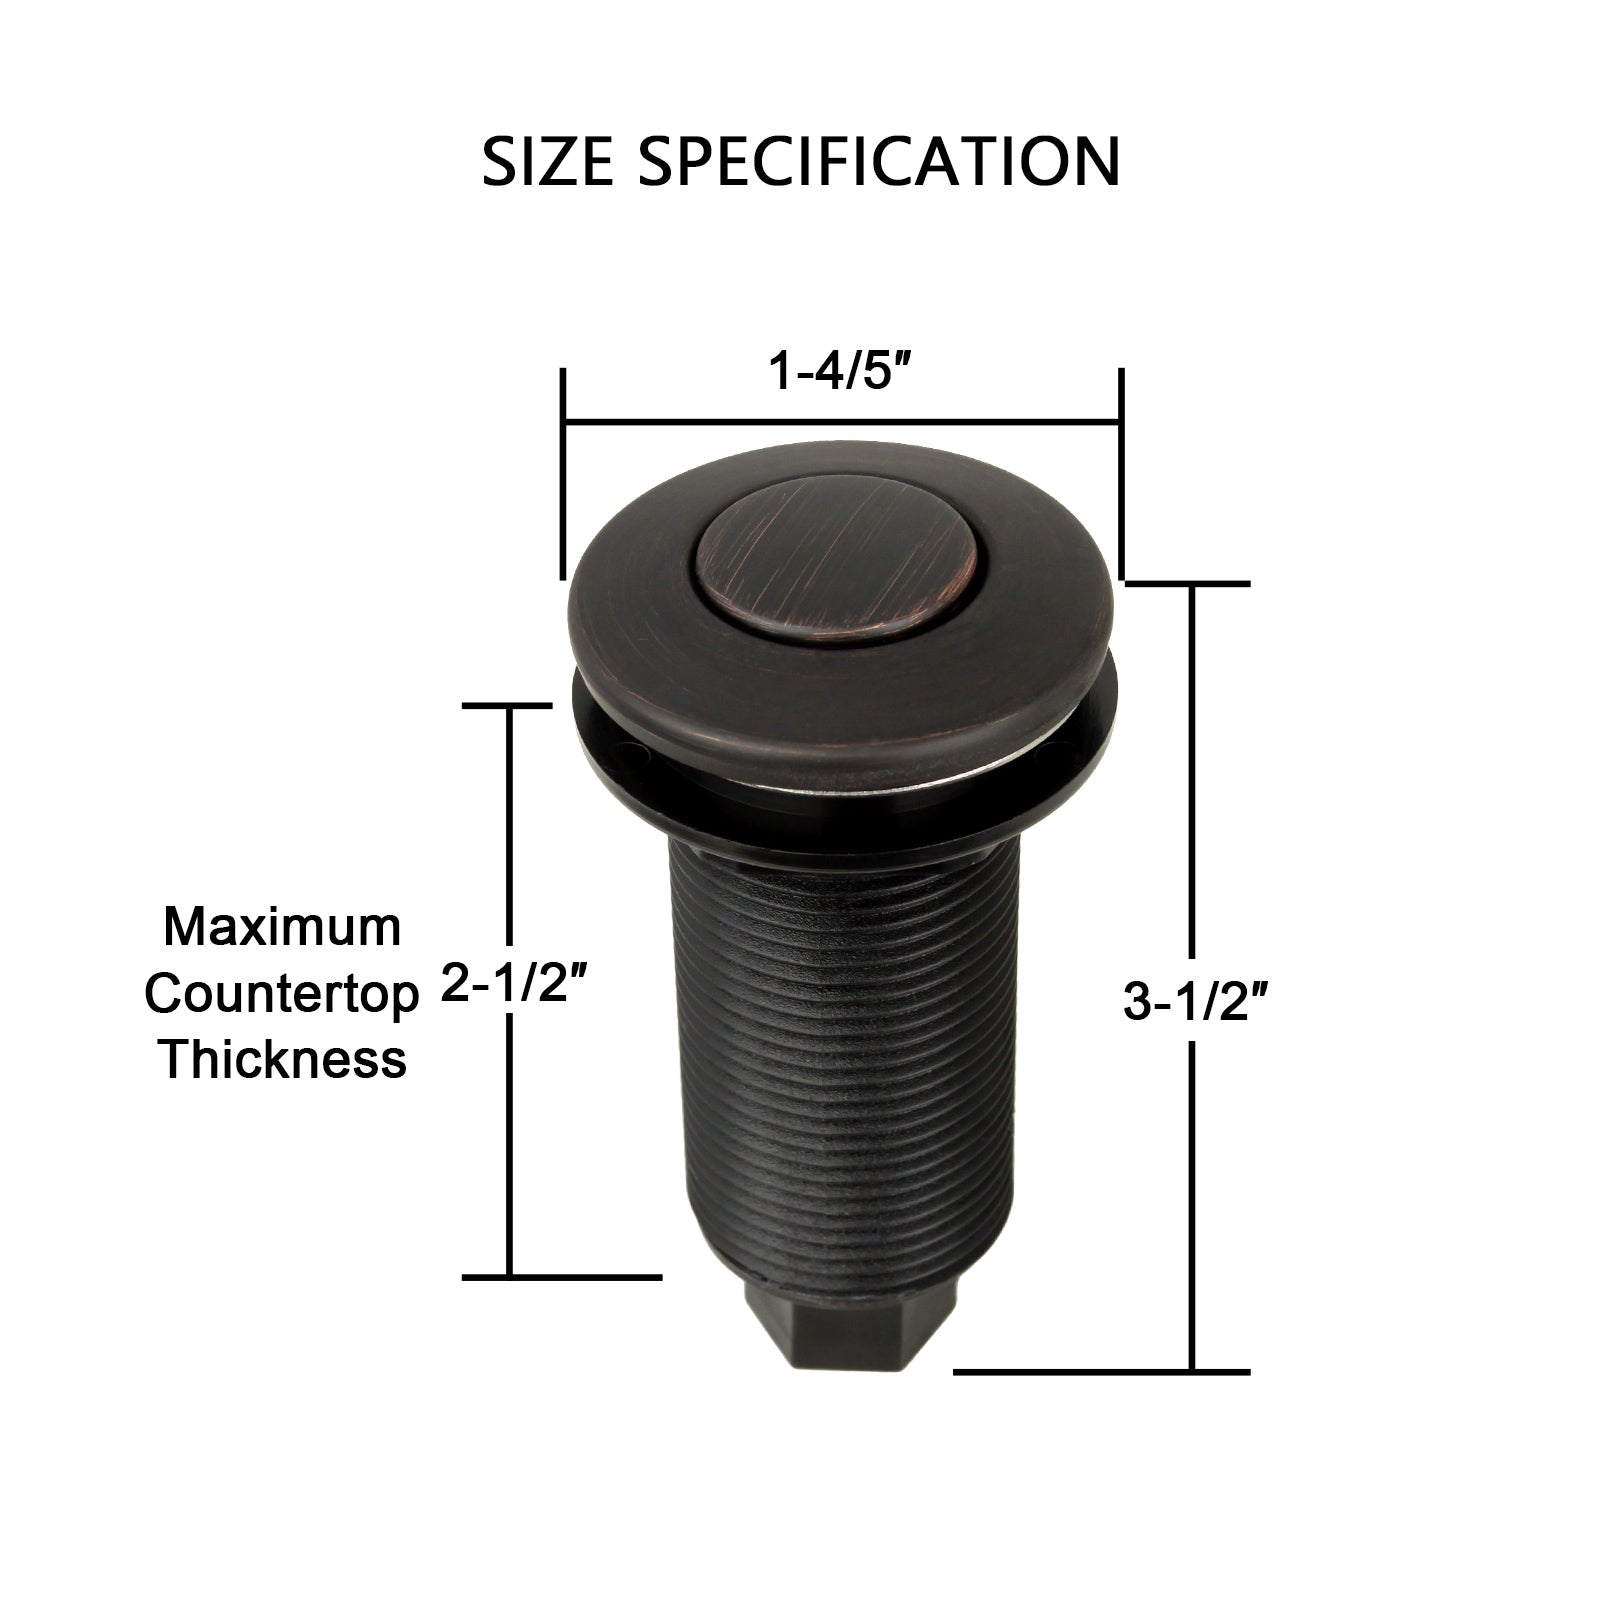 Single Outlet Antique Oil Rubbed Bronze Garbage Disposal Kitchen Air Switch Kit - AK79001A-ORB